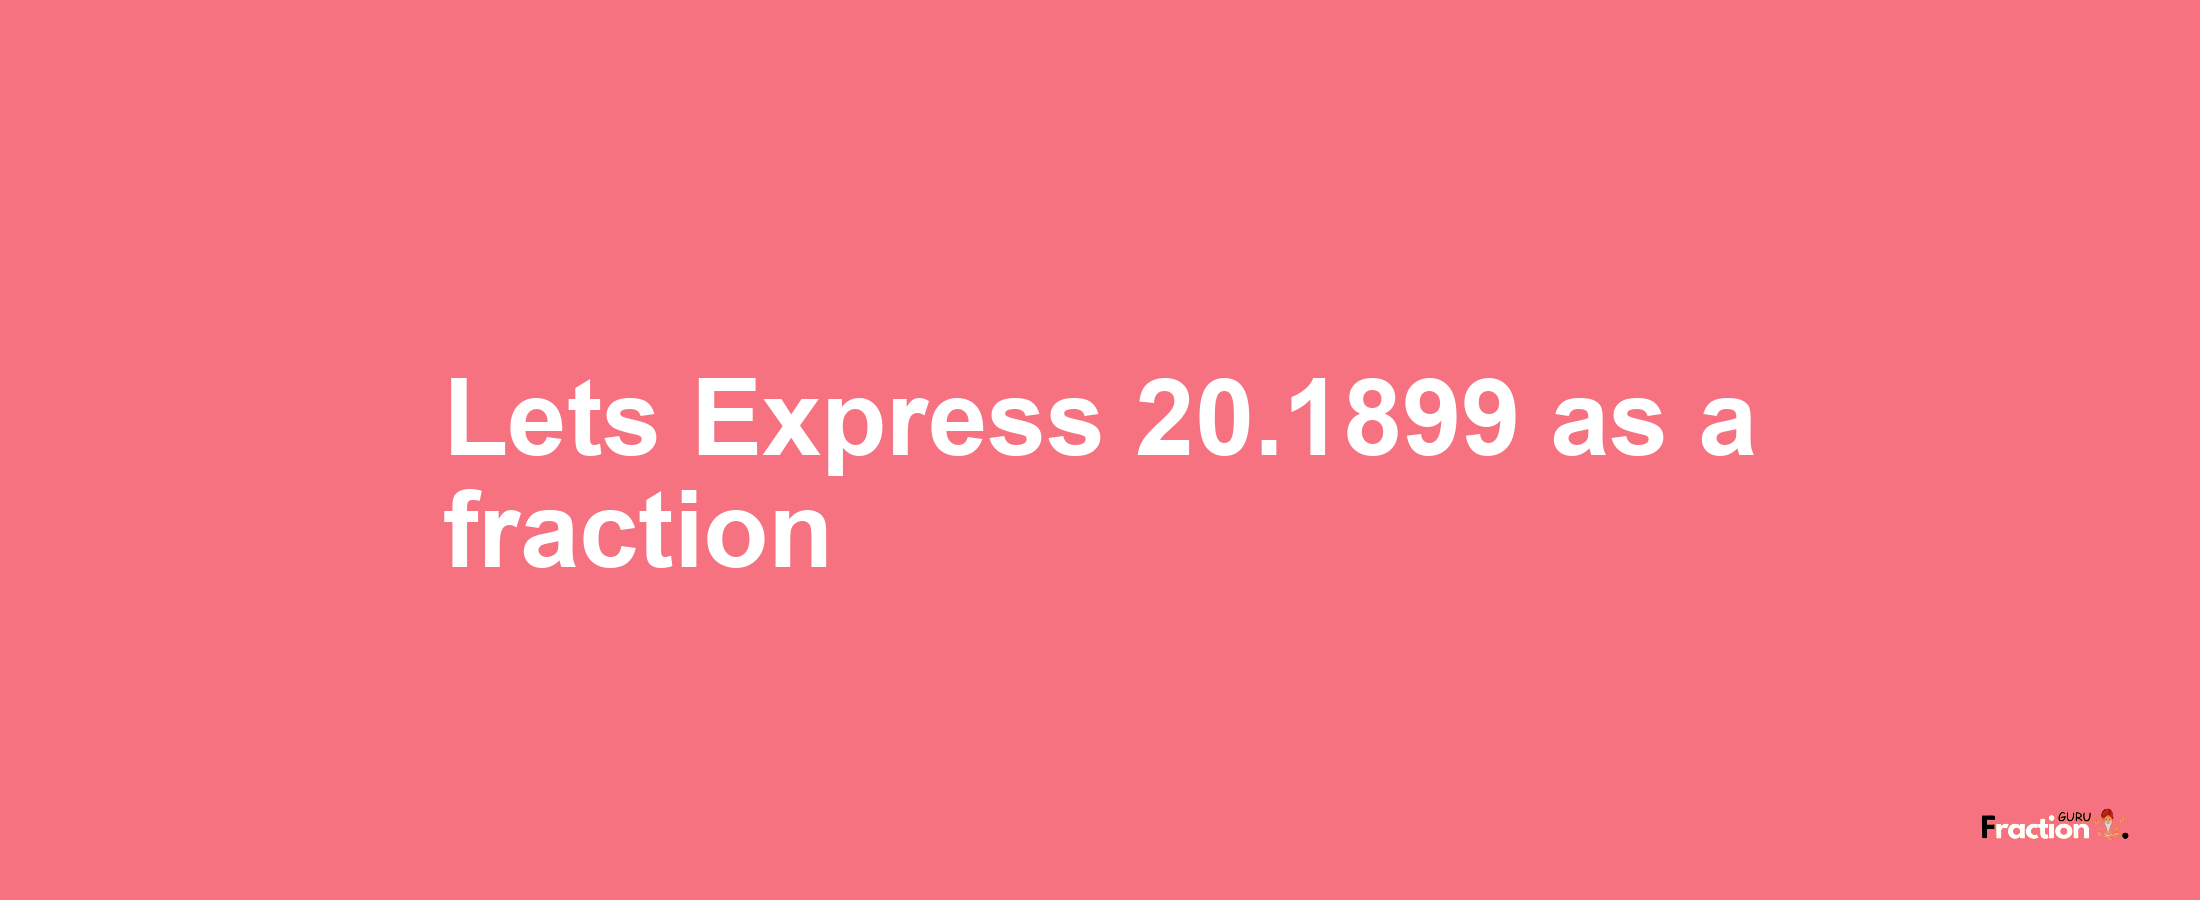 Lets Express 20.1899 as afraction